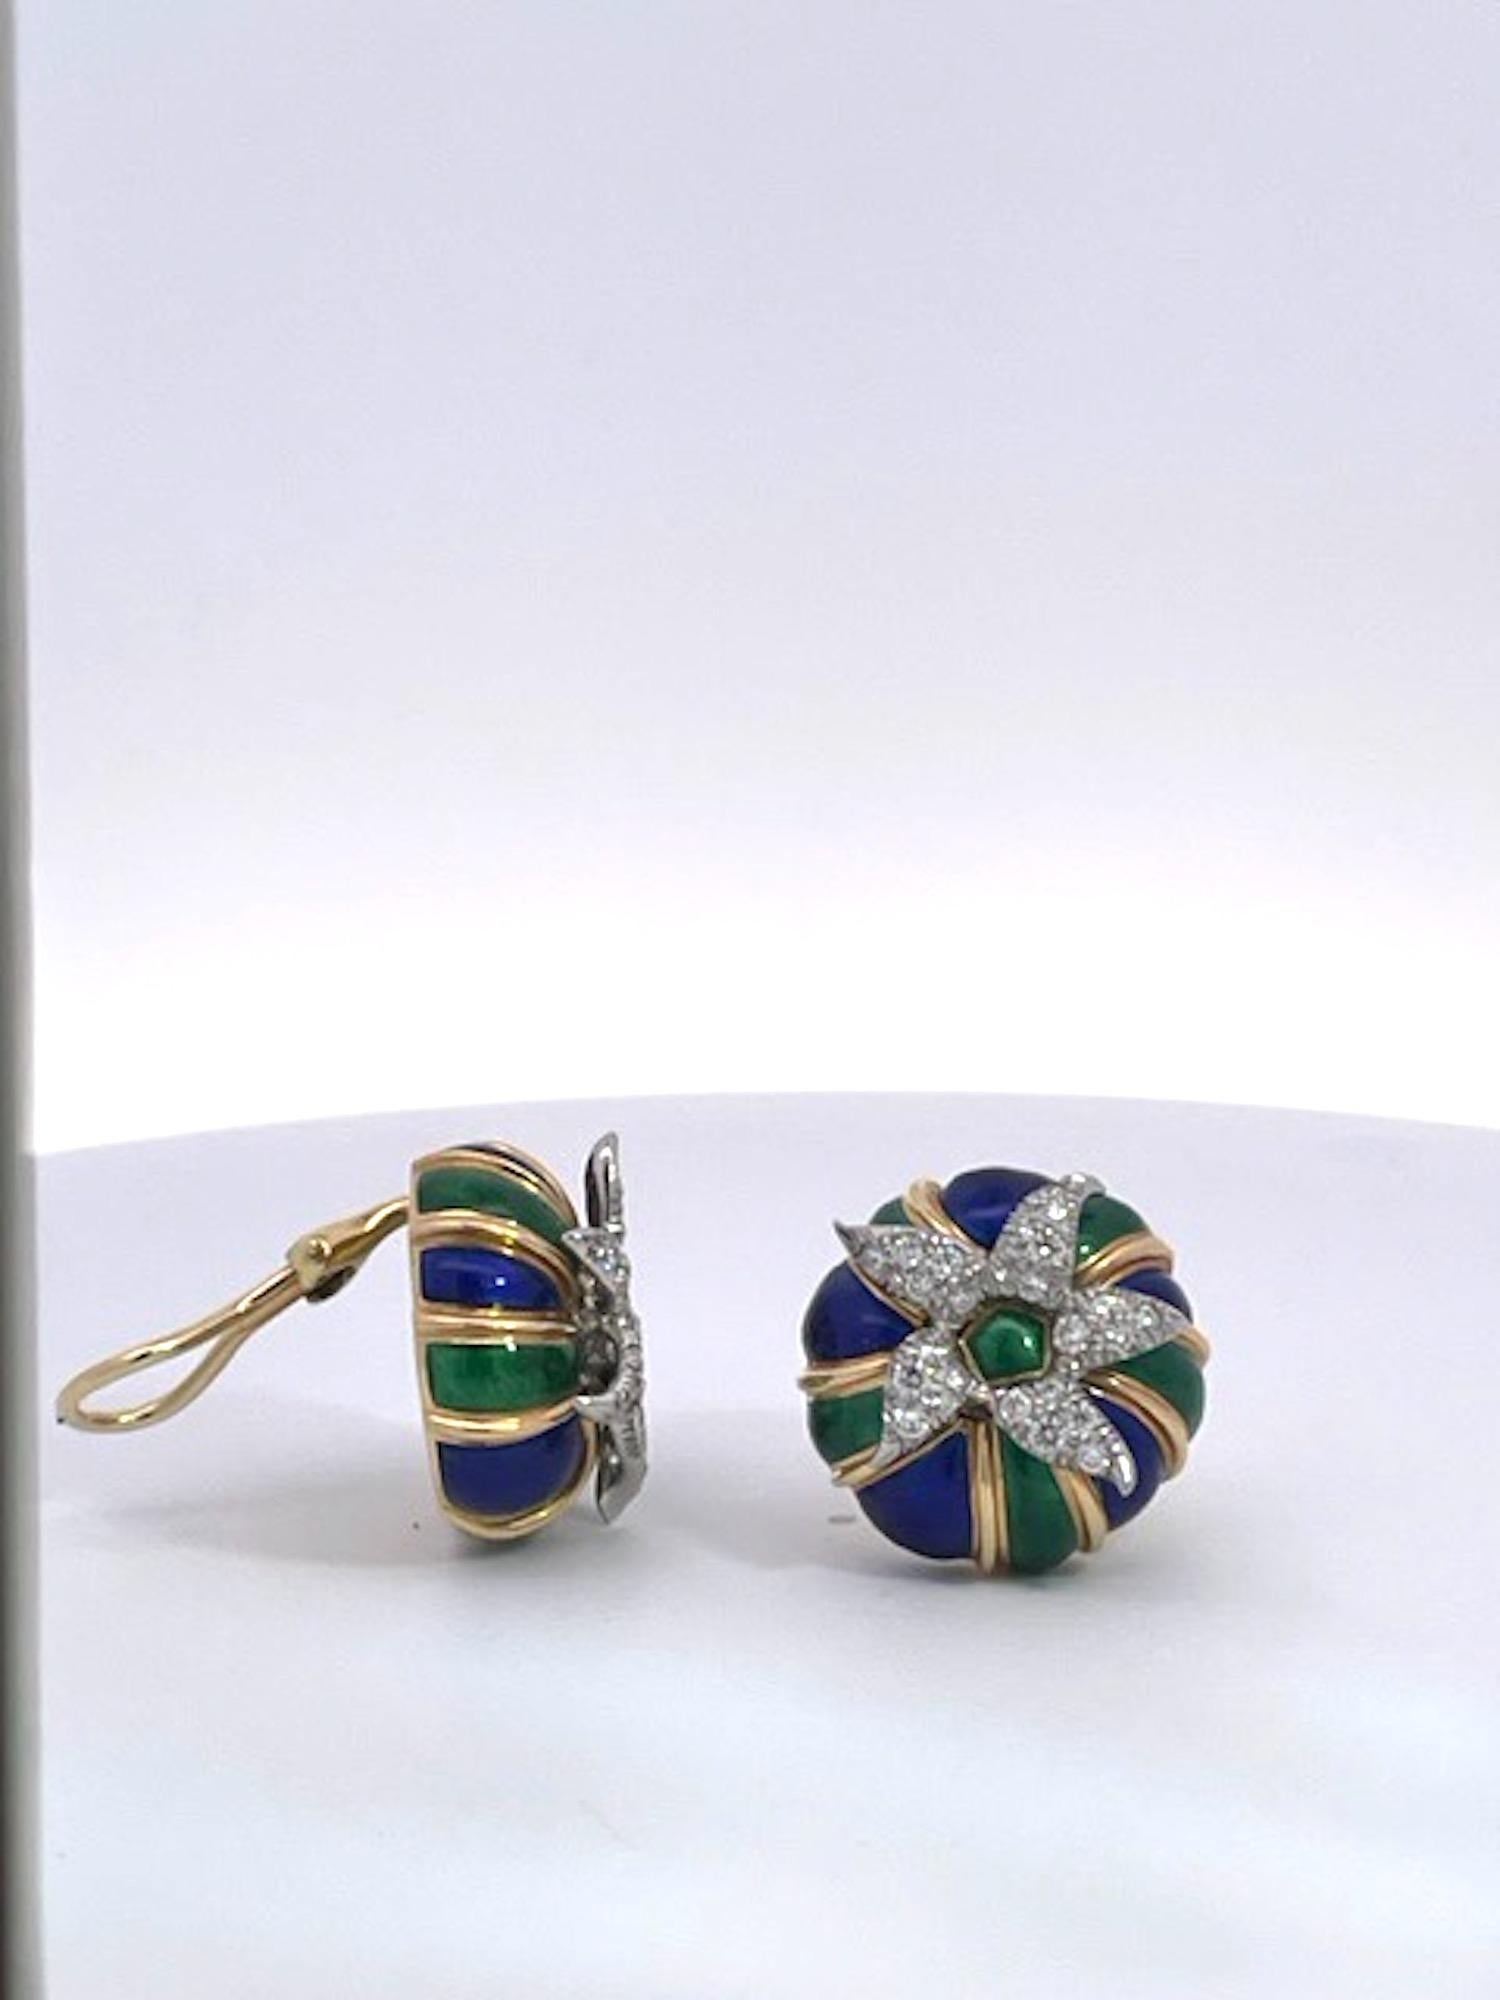 These Schlumberger earrings are special.  They are set in 18K Yellow Gold with Blue and Green enamel and a Diamond starburst in the center.  The Diamonds are set in Platinum as all Schlumberger  pieces are and these are round.  They measure